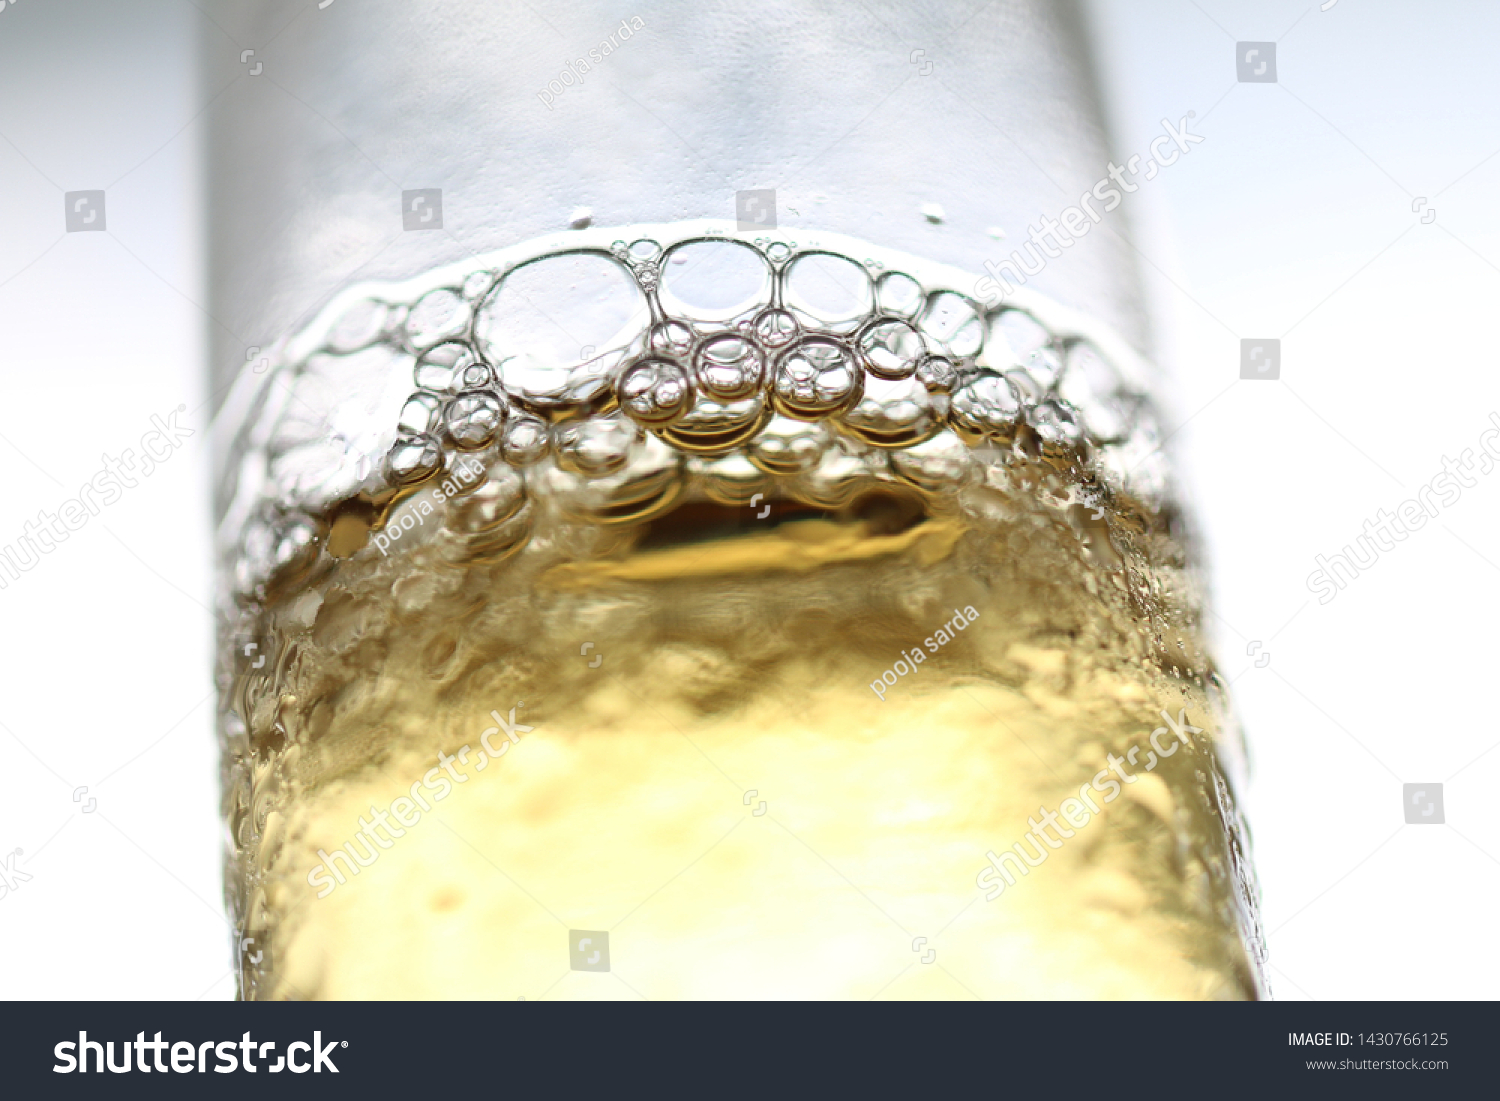 Download Bear Bottle Bubbles Yellow Colored Food And Drink Stock Image 1430766125 PSD Mockup Templates